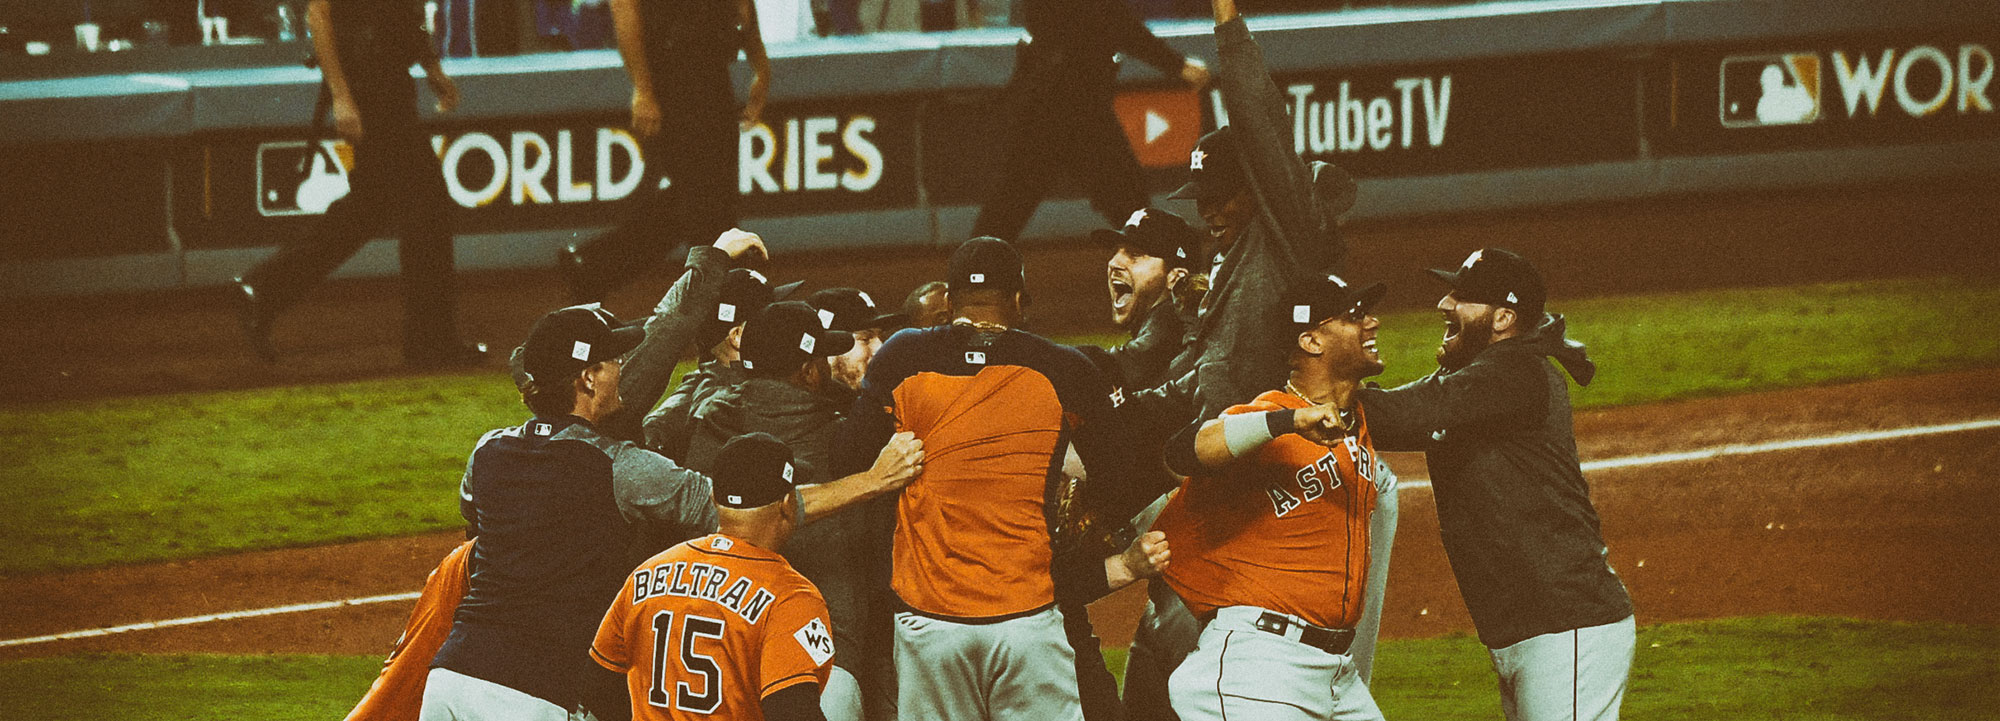 The Houston Astros are the 2017 World Series champions